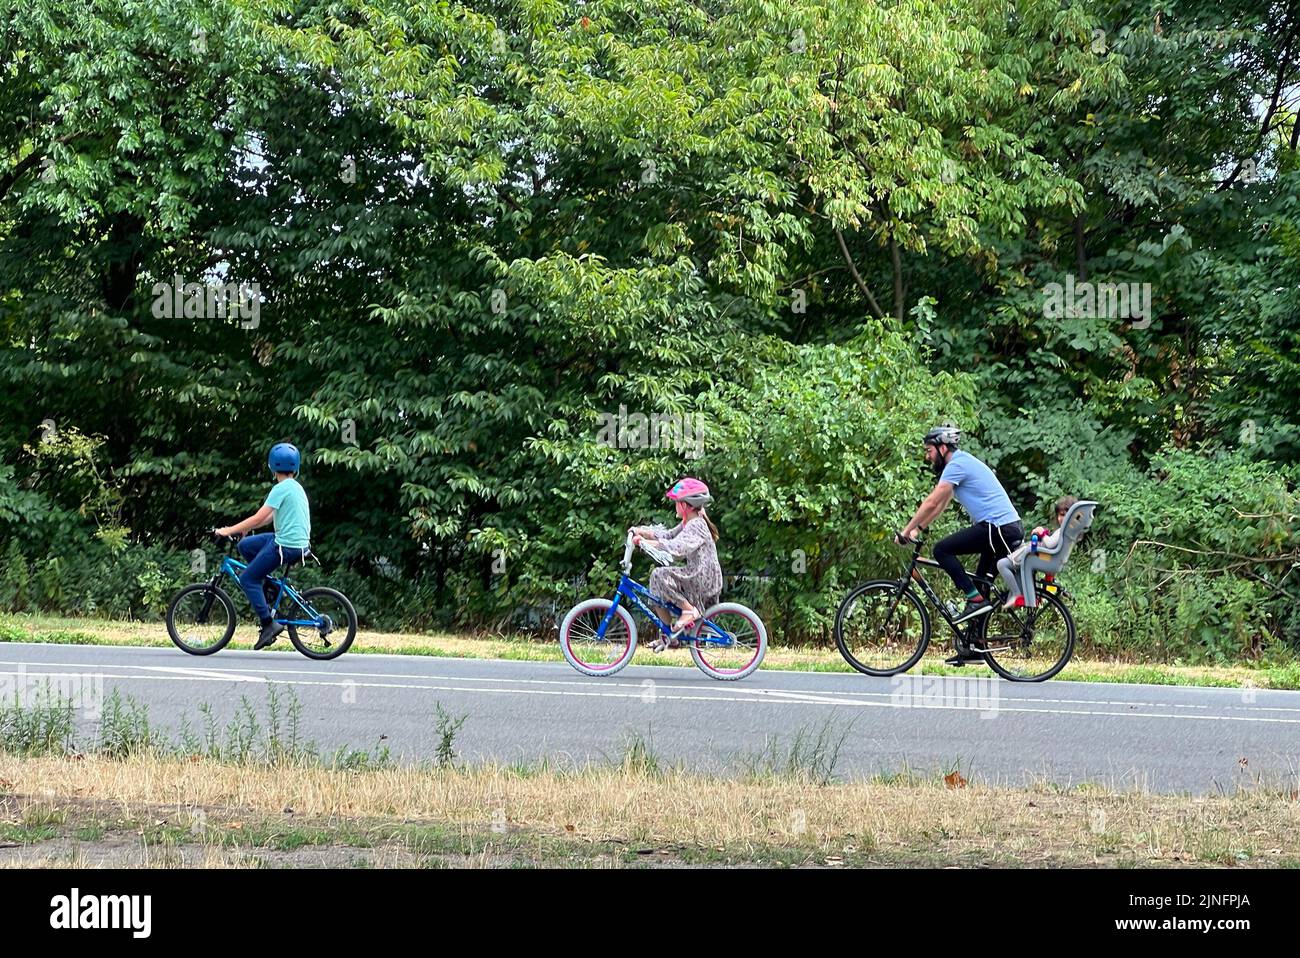 Dad with kids riding bicycles on the road in Prospect Park, Brooklyn, New York. Stock Photo